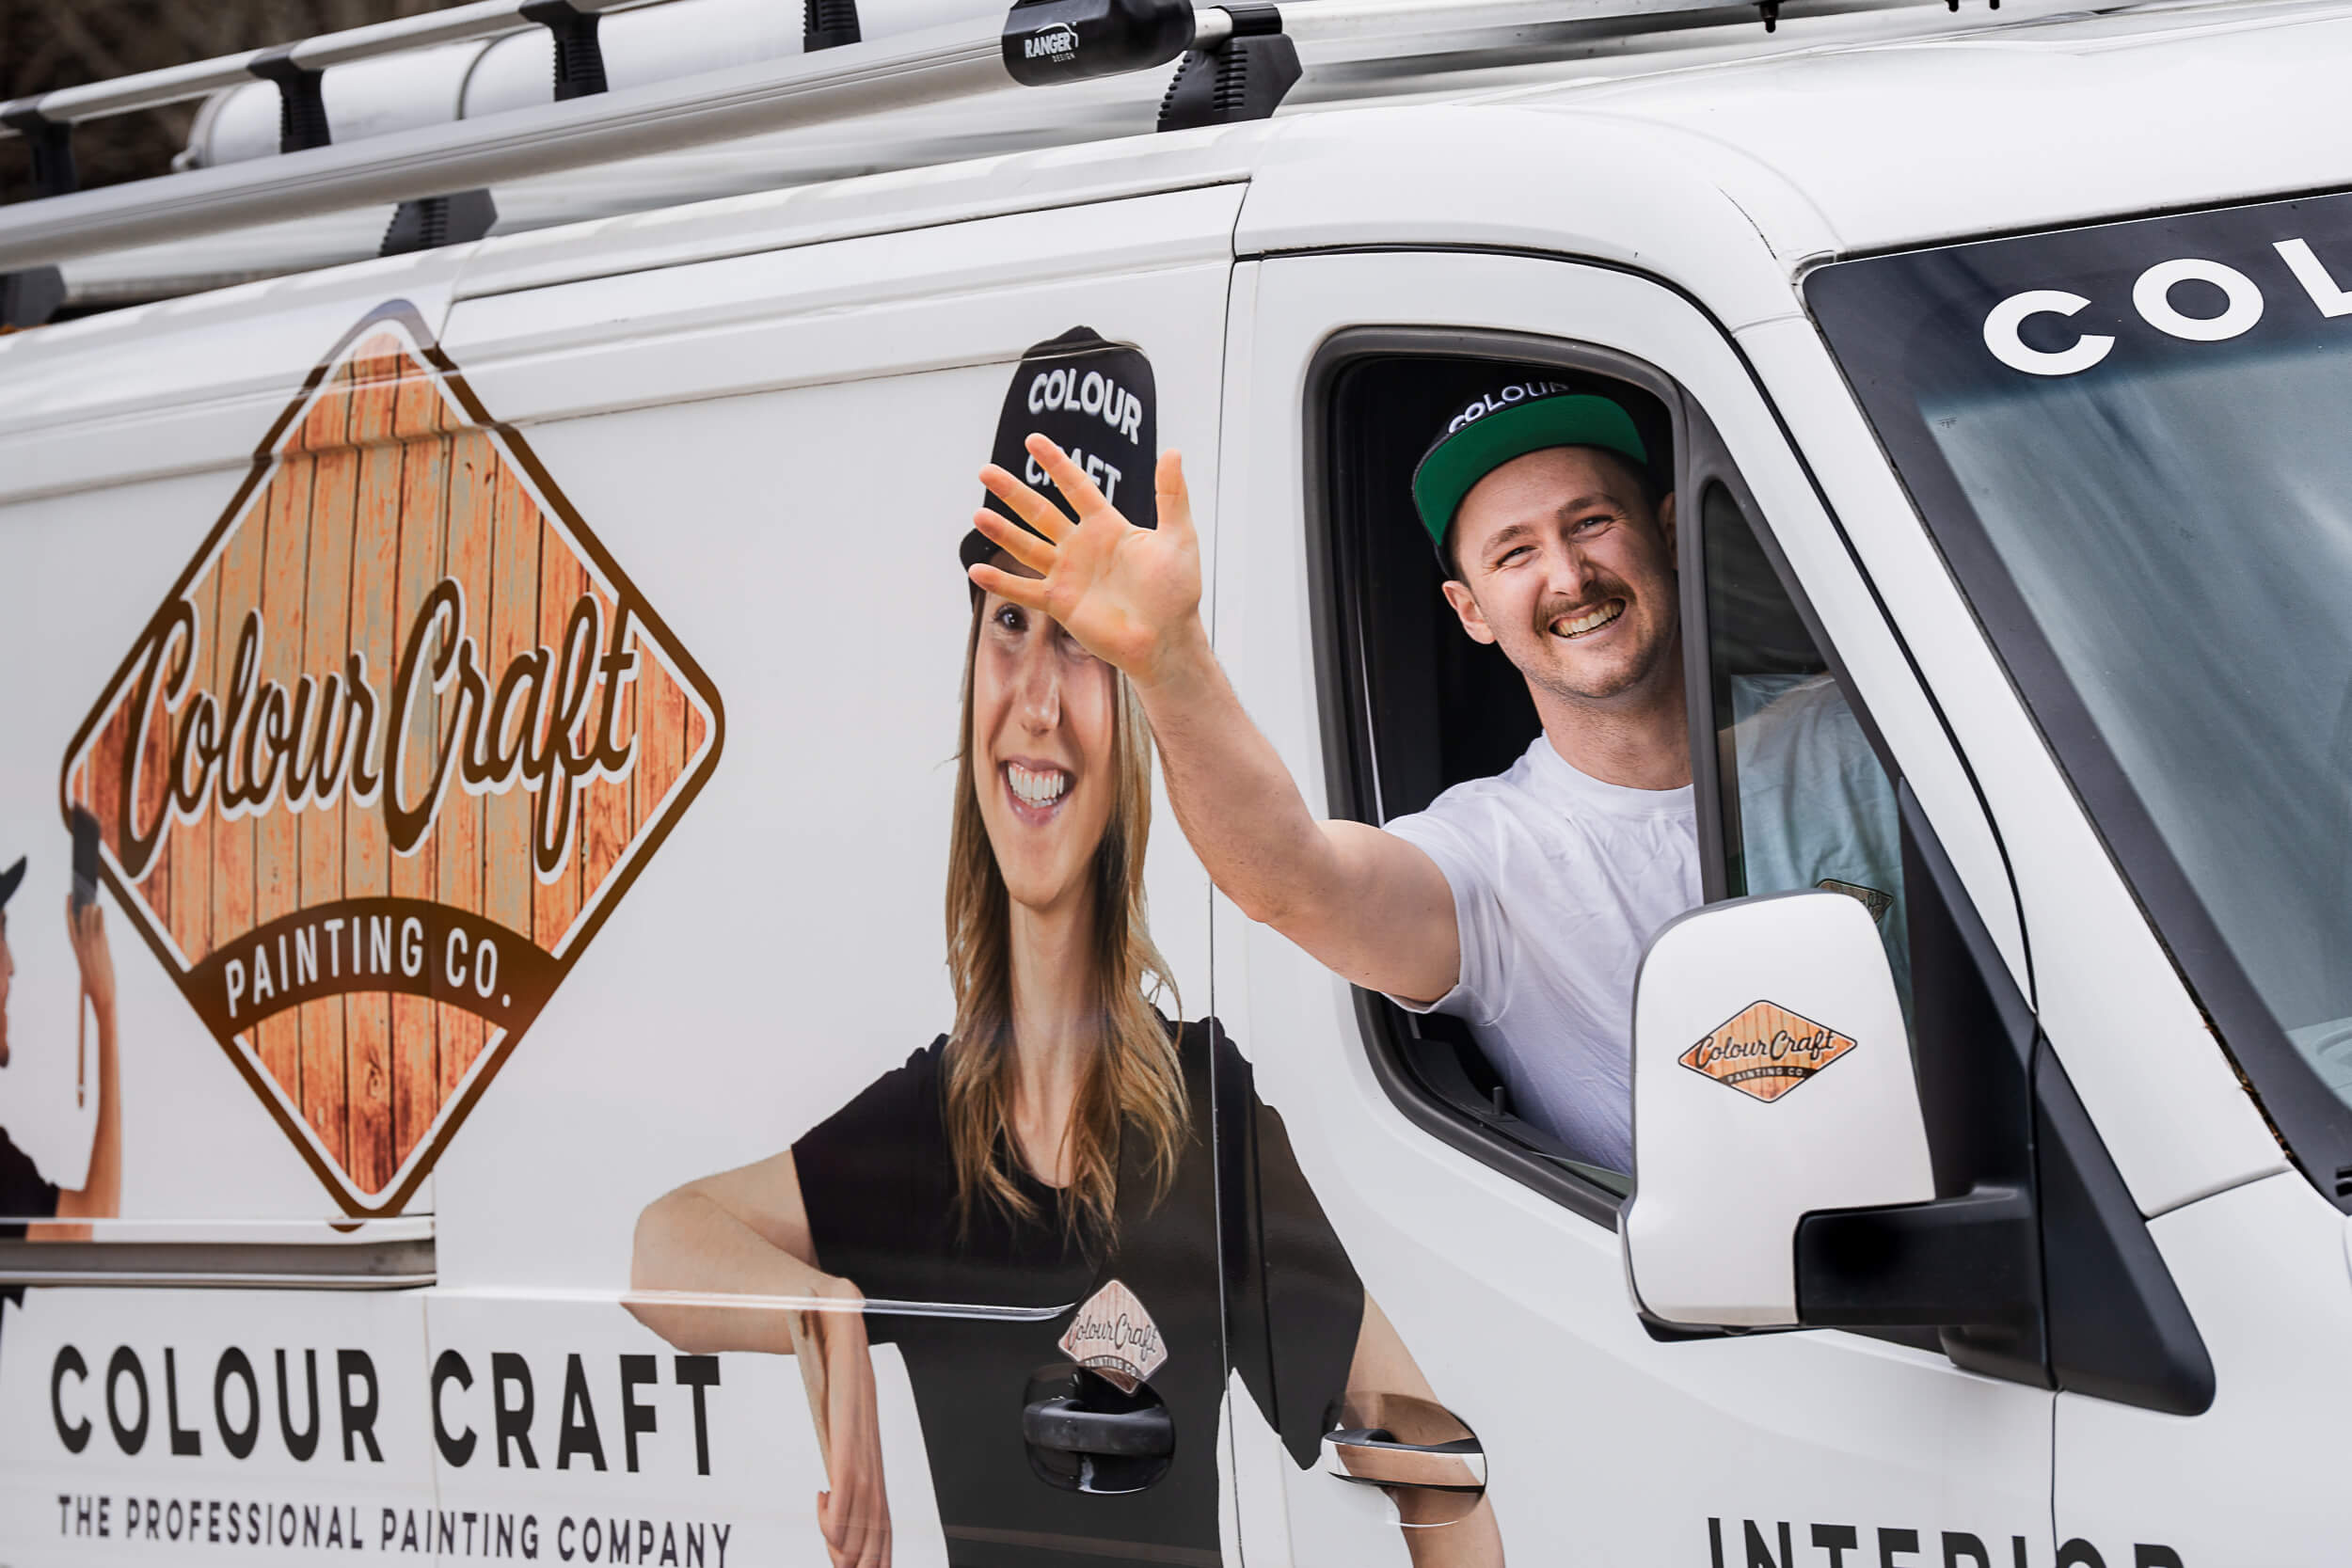 Cheerful male painter from Colour Craft waving from the driver's seat of the company's branded vehicle, with the playful graphic wrap featuring a female colleague. The van prominently displays the Colour Craft logo, emphasizing the brand's professional painting services.